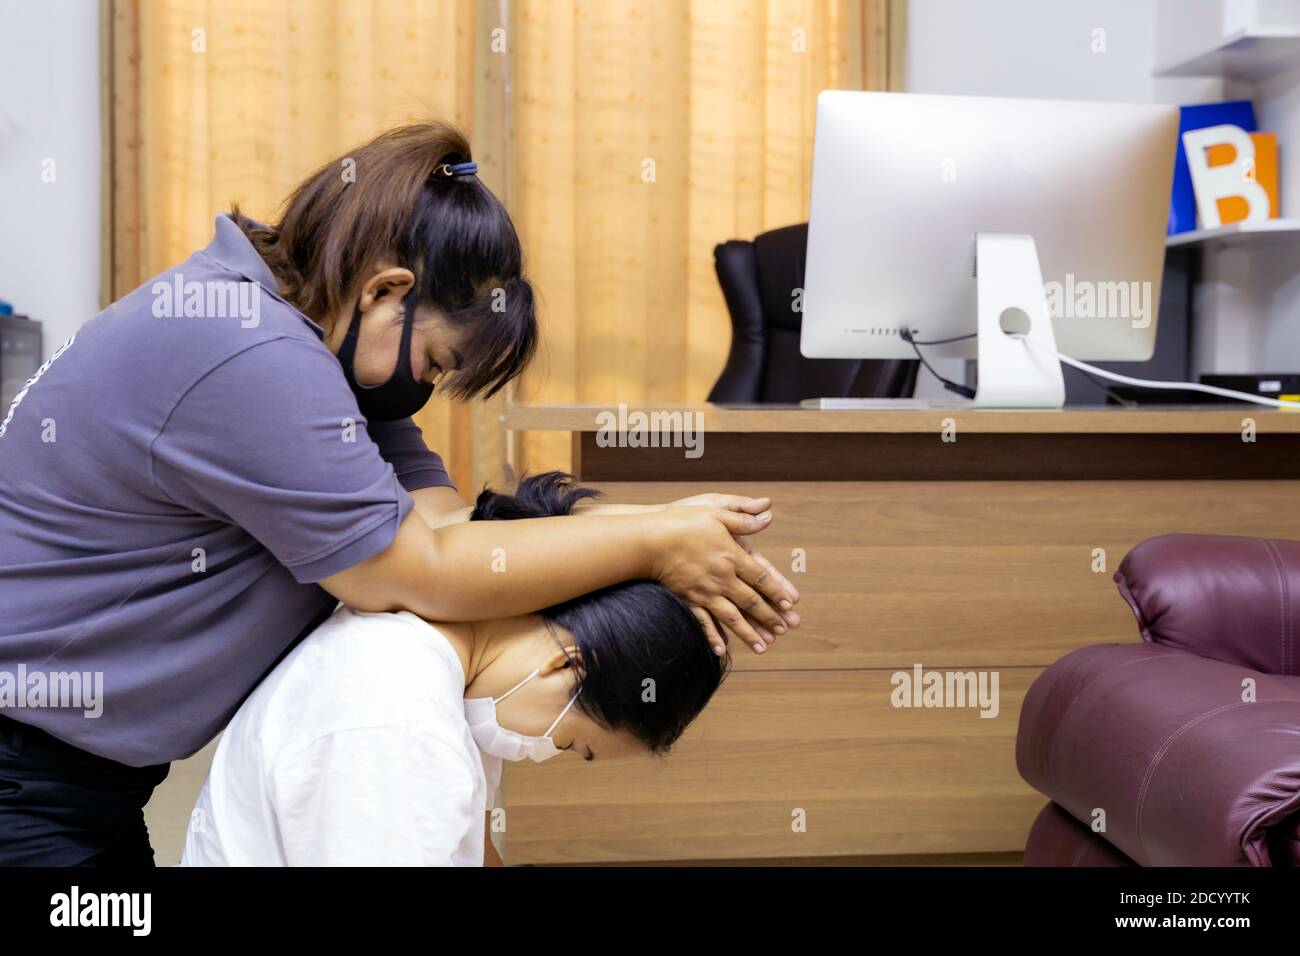 Quarantine asian woman do massage at home with face mask while city lockdown for social distance due to coronavirus pandemic. Massage is one of servic Stock Photo